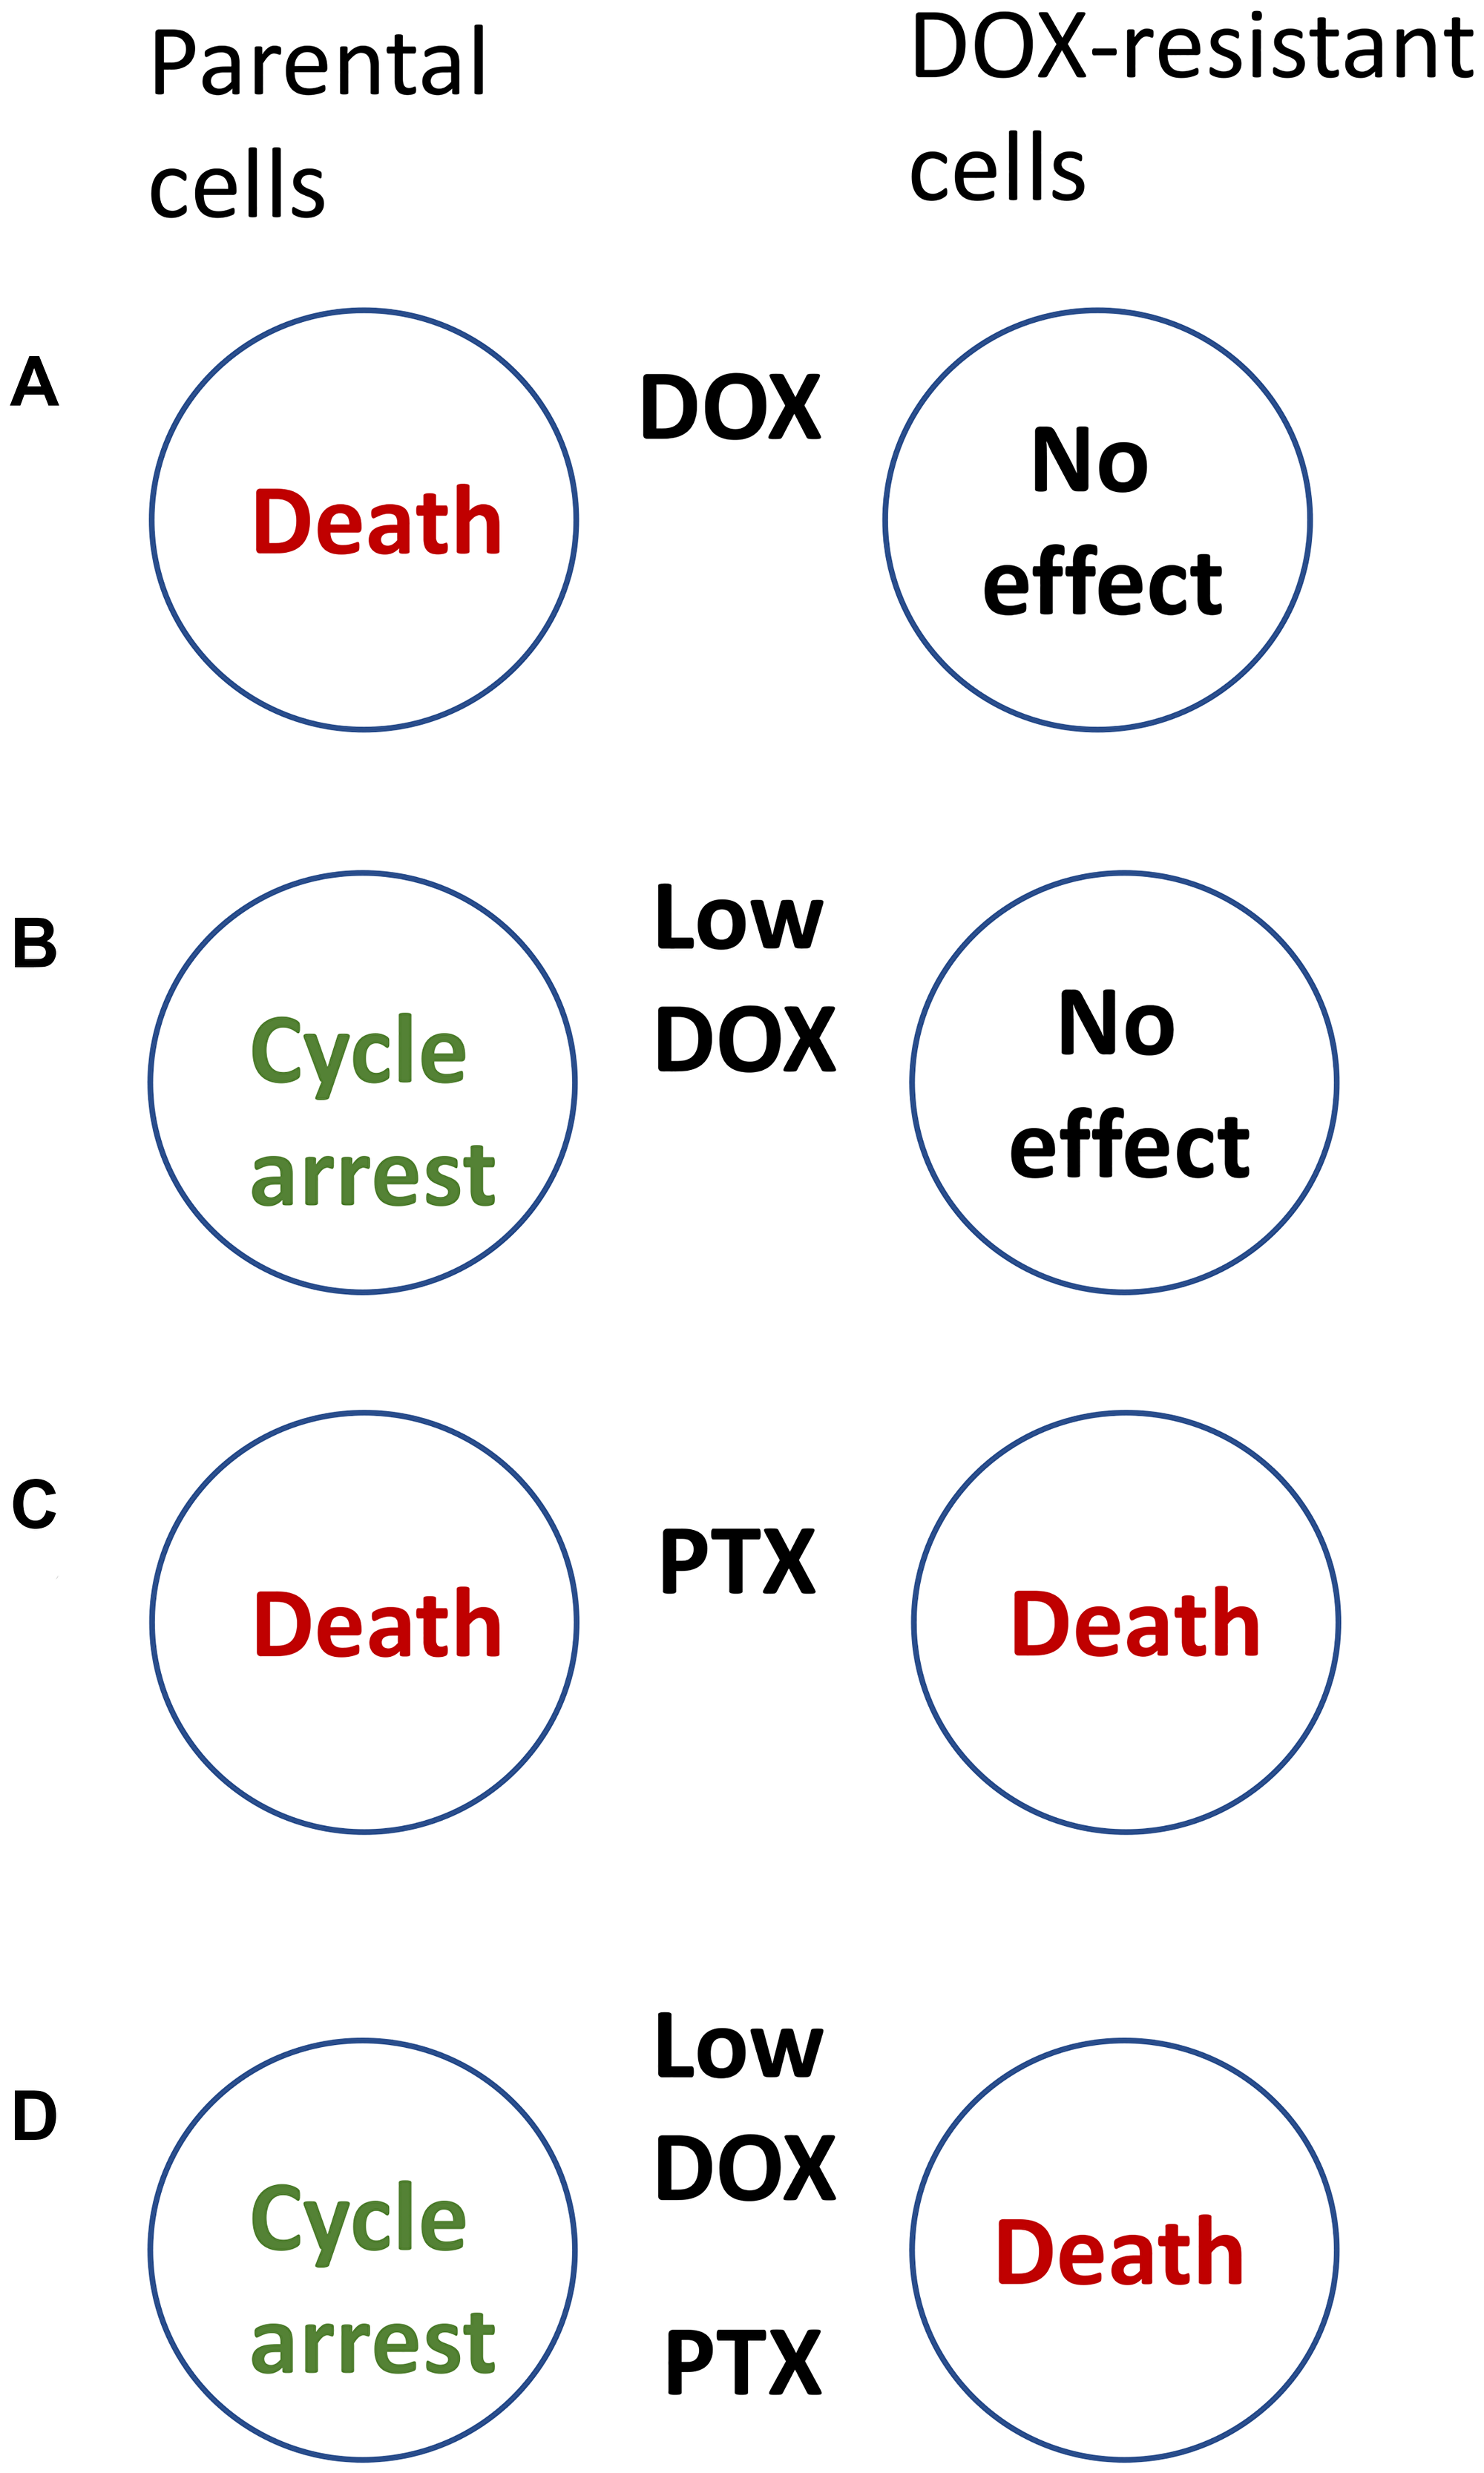 How to kill DOX-resistant cells, sparing sensitive cells.